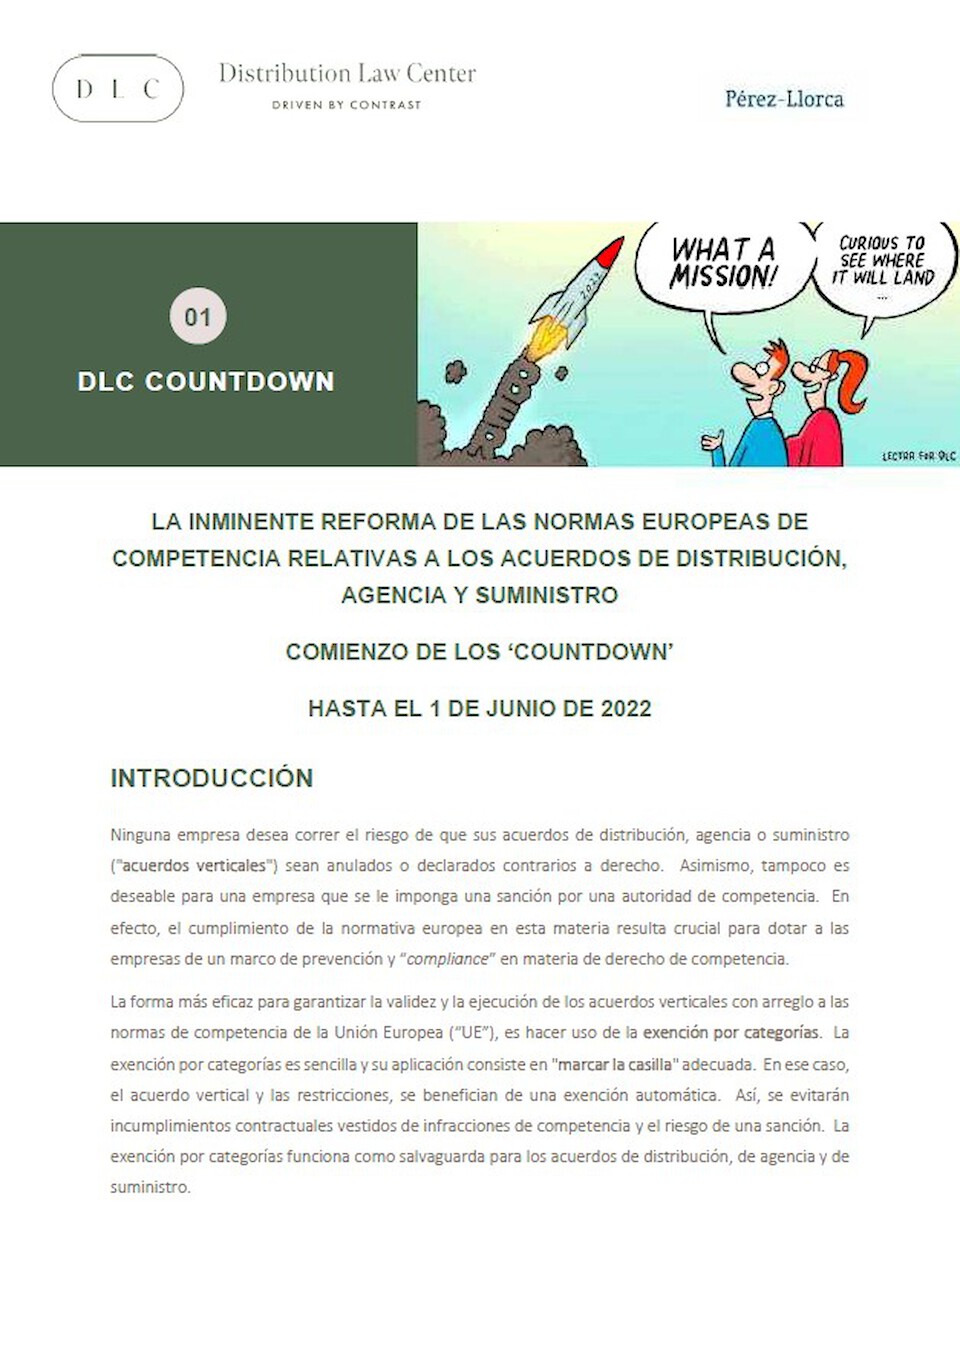 Distribution Law Center Countdown I - European competition rules relating to distribution, agency and supply agreements about to change